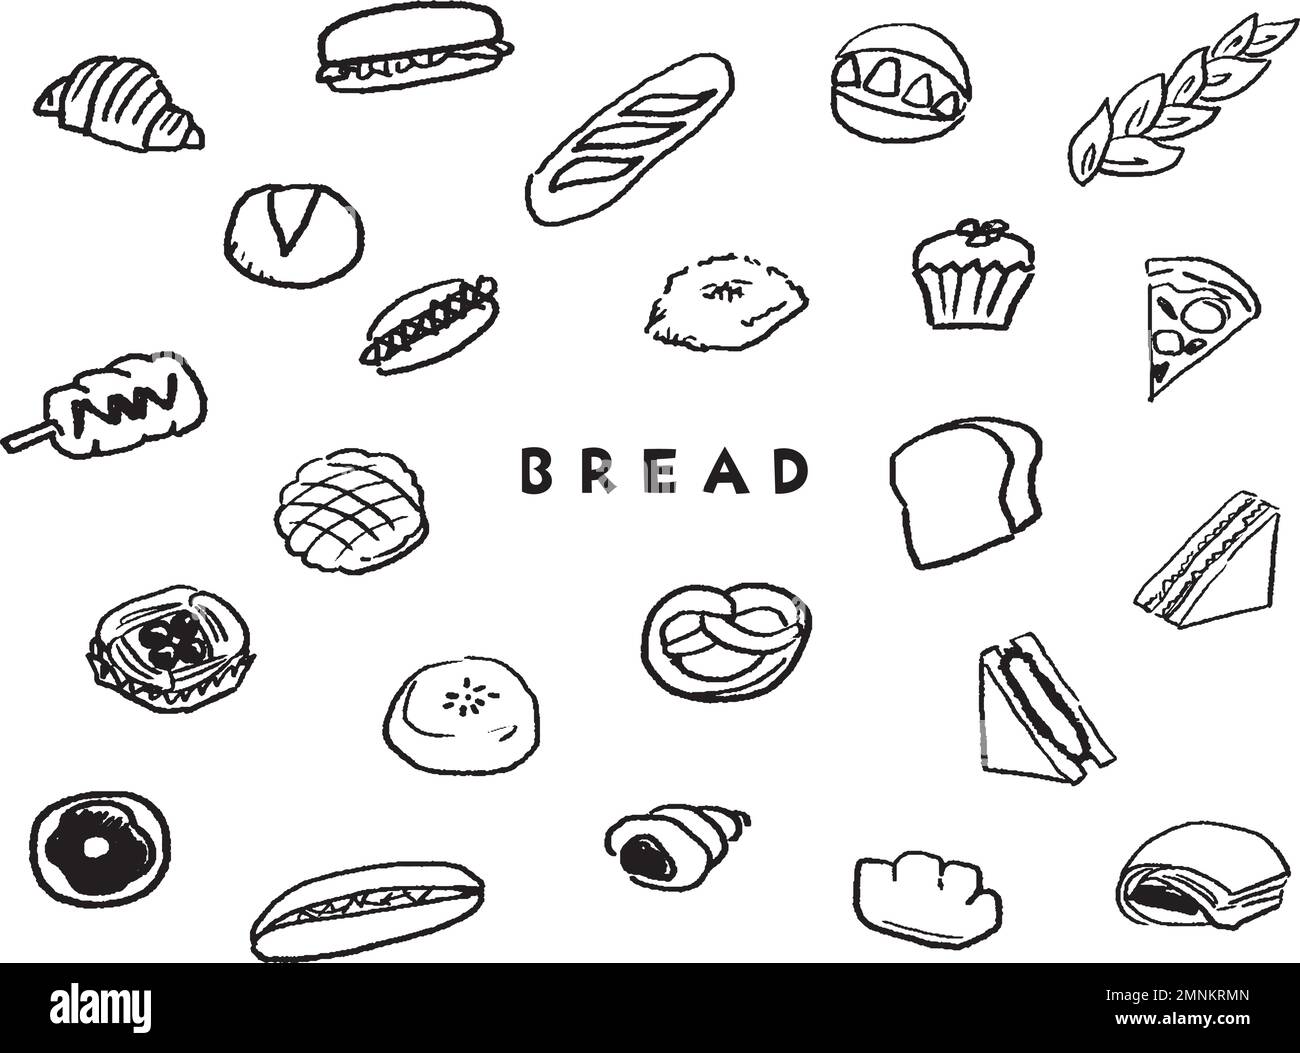 Various bread line drawing icon set. Illustrations of delicious-looking bread such as bread, visas and sandwiches. Stock Vector